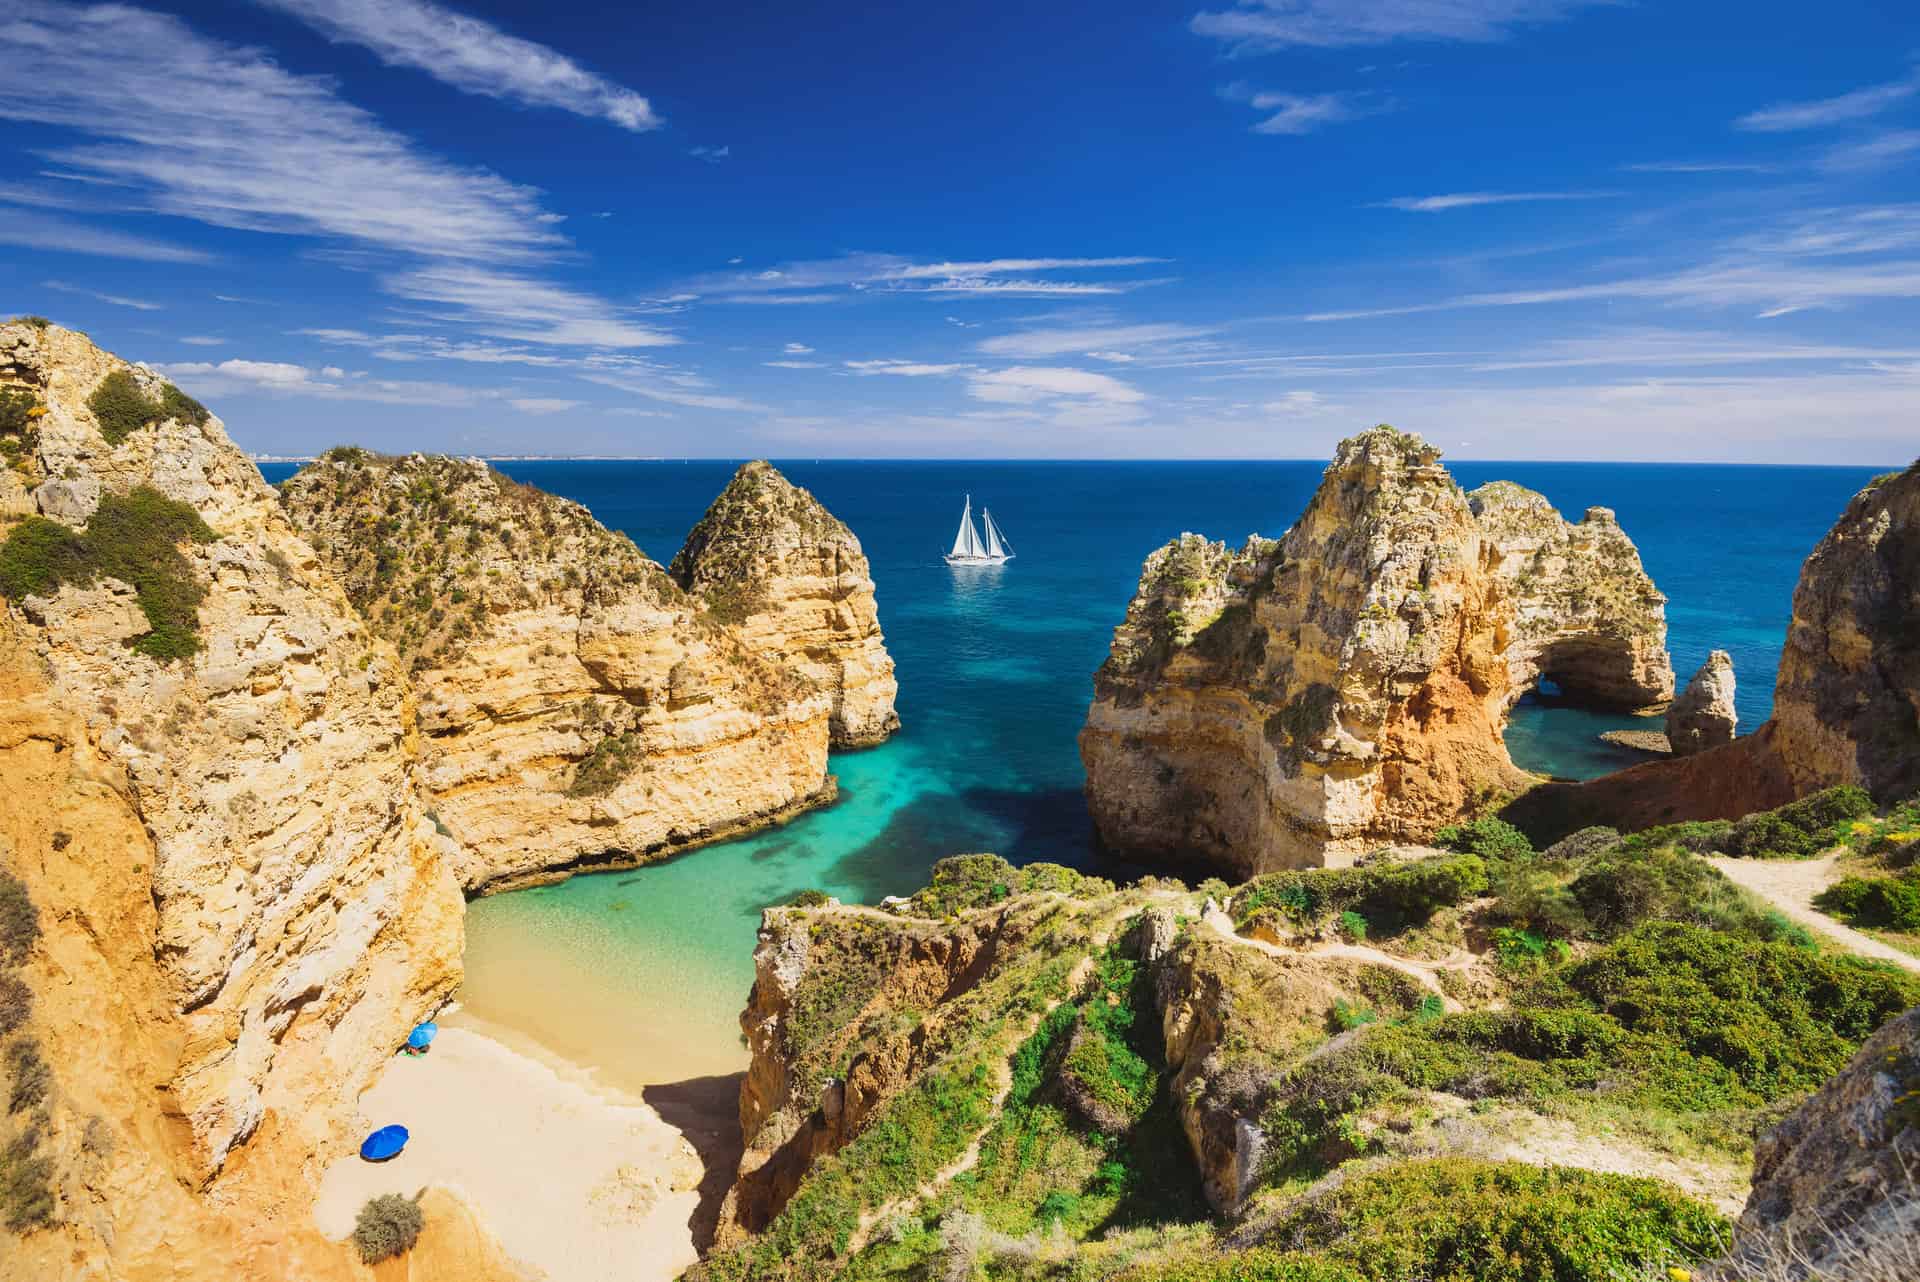 What's the best time to visit Portugal?